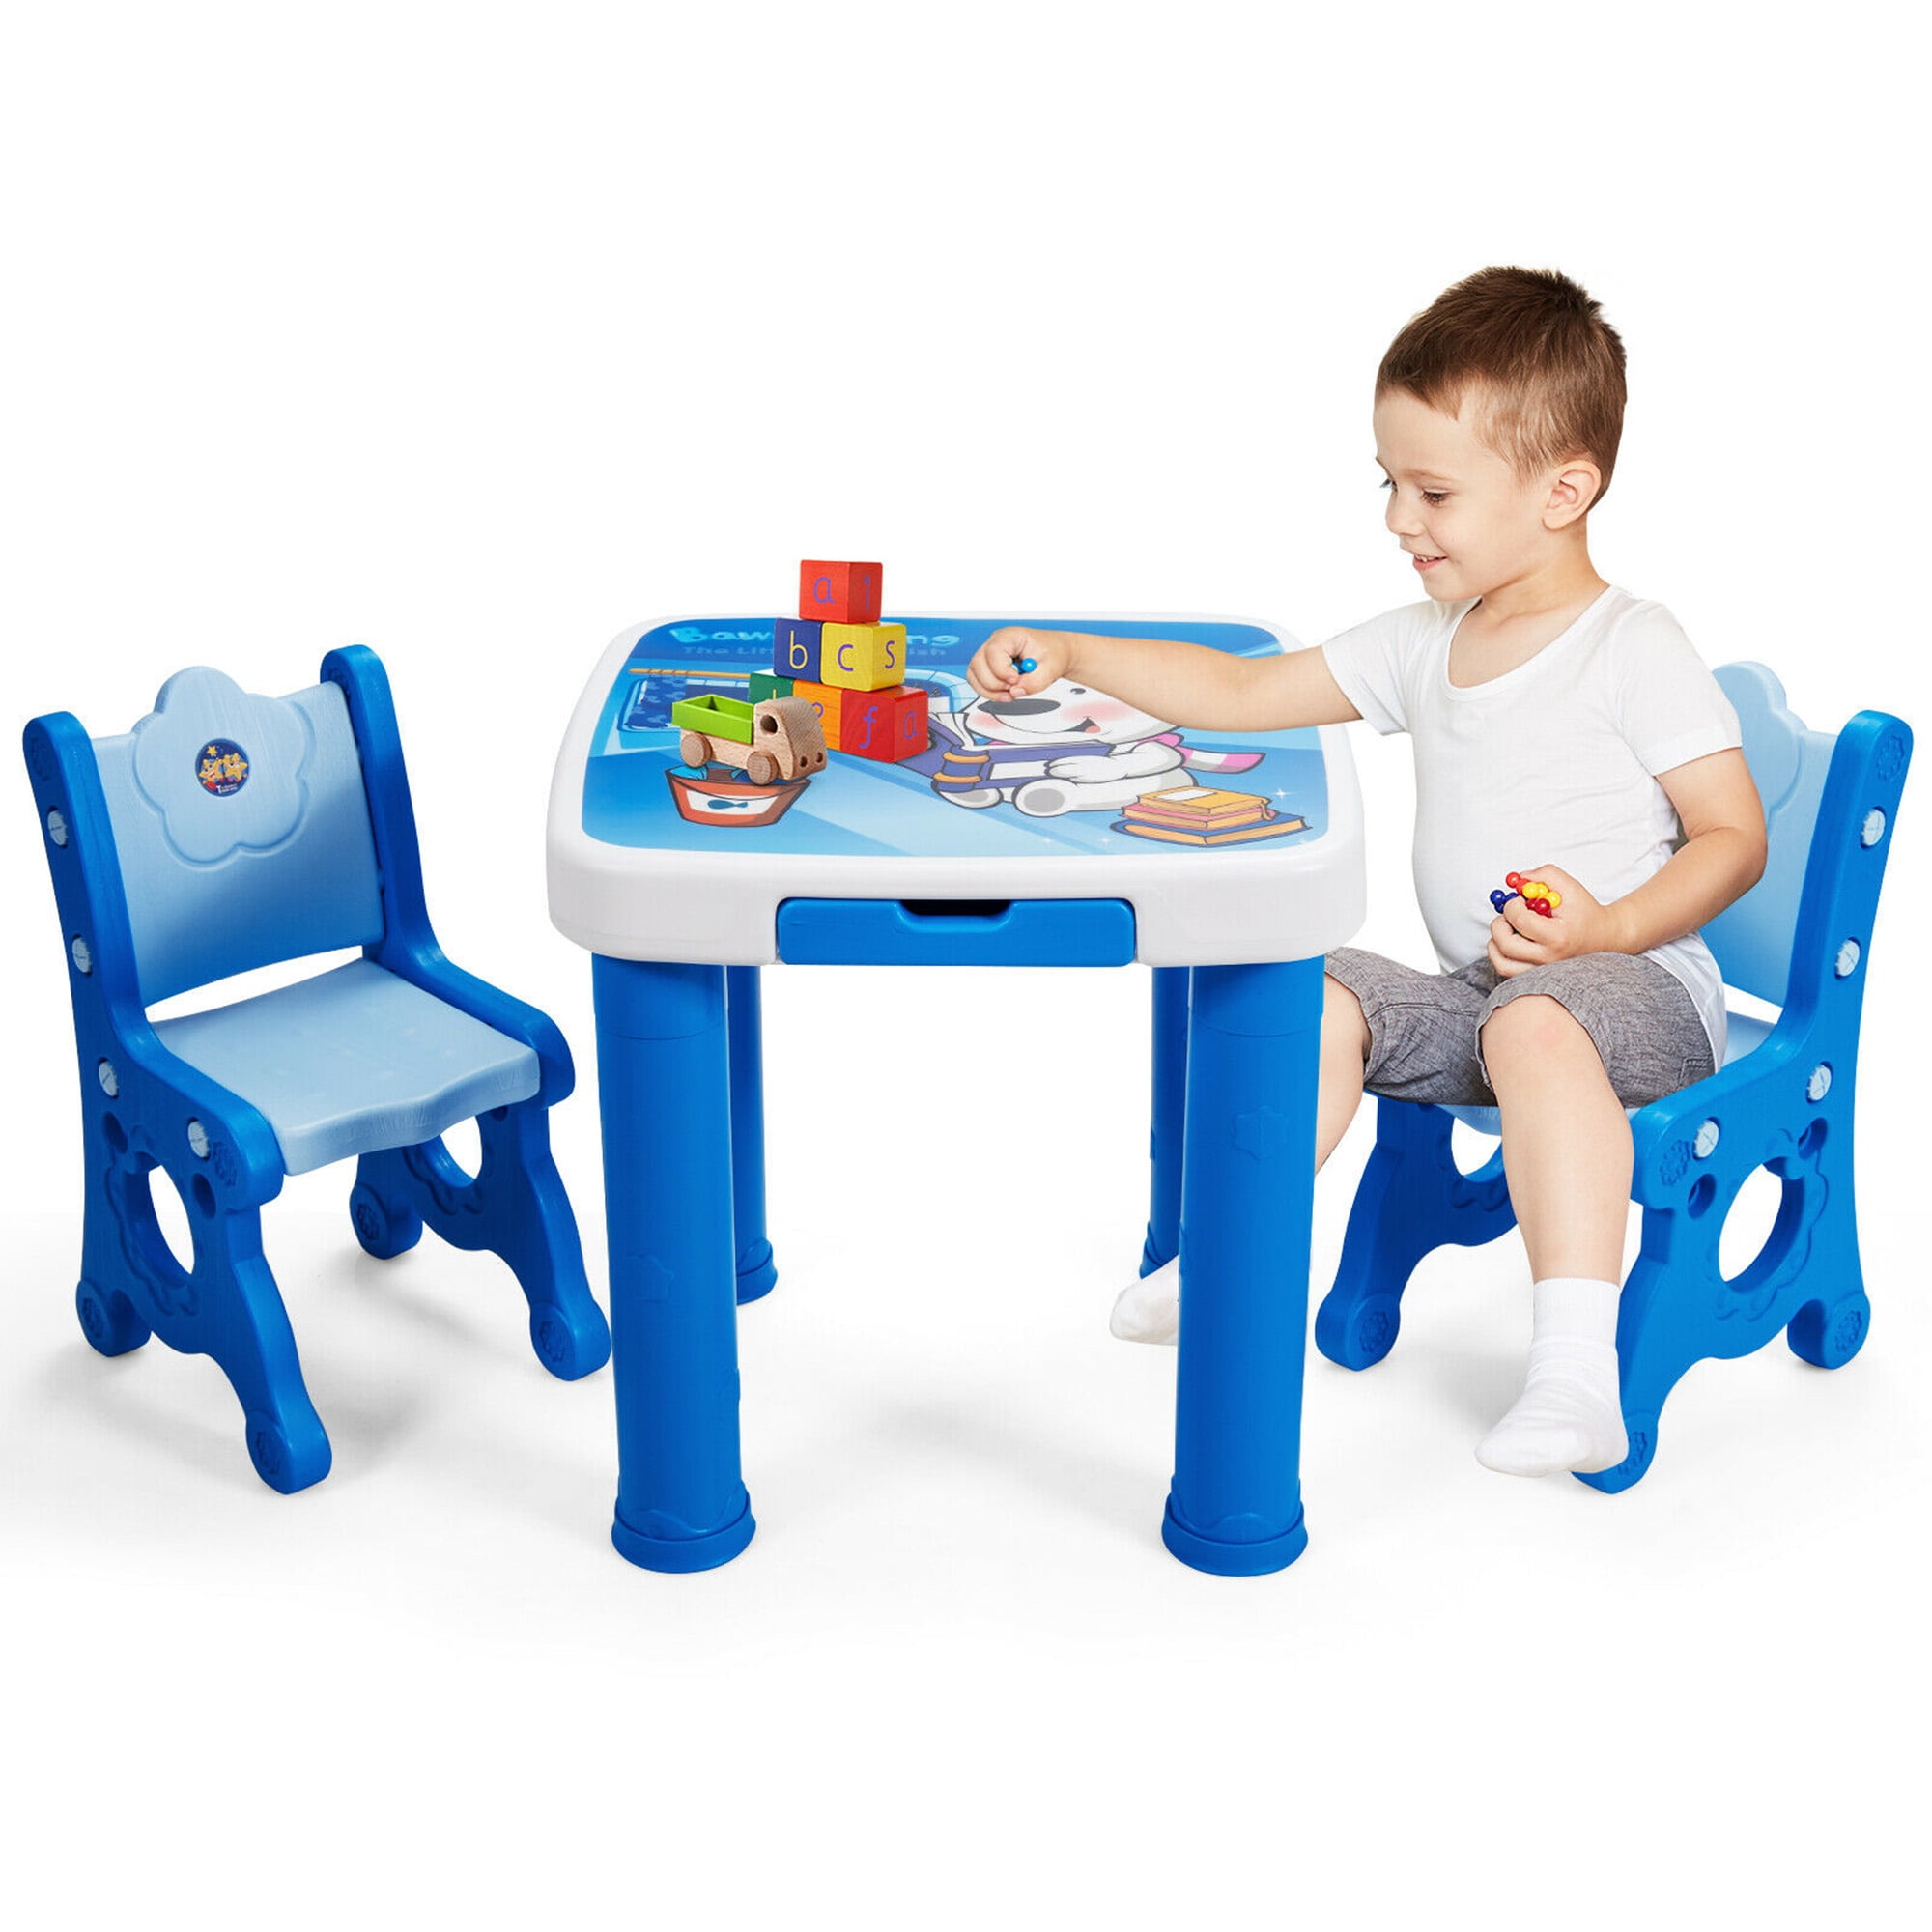 Plastic Kids Set Chair Table Chairs Furniture Play And Children Activity Child 